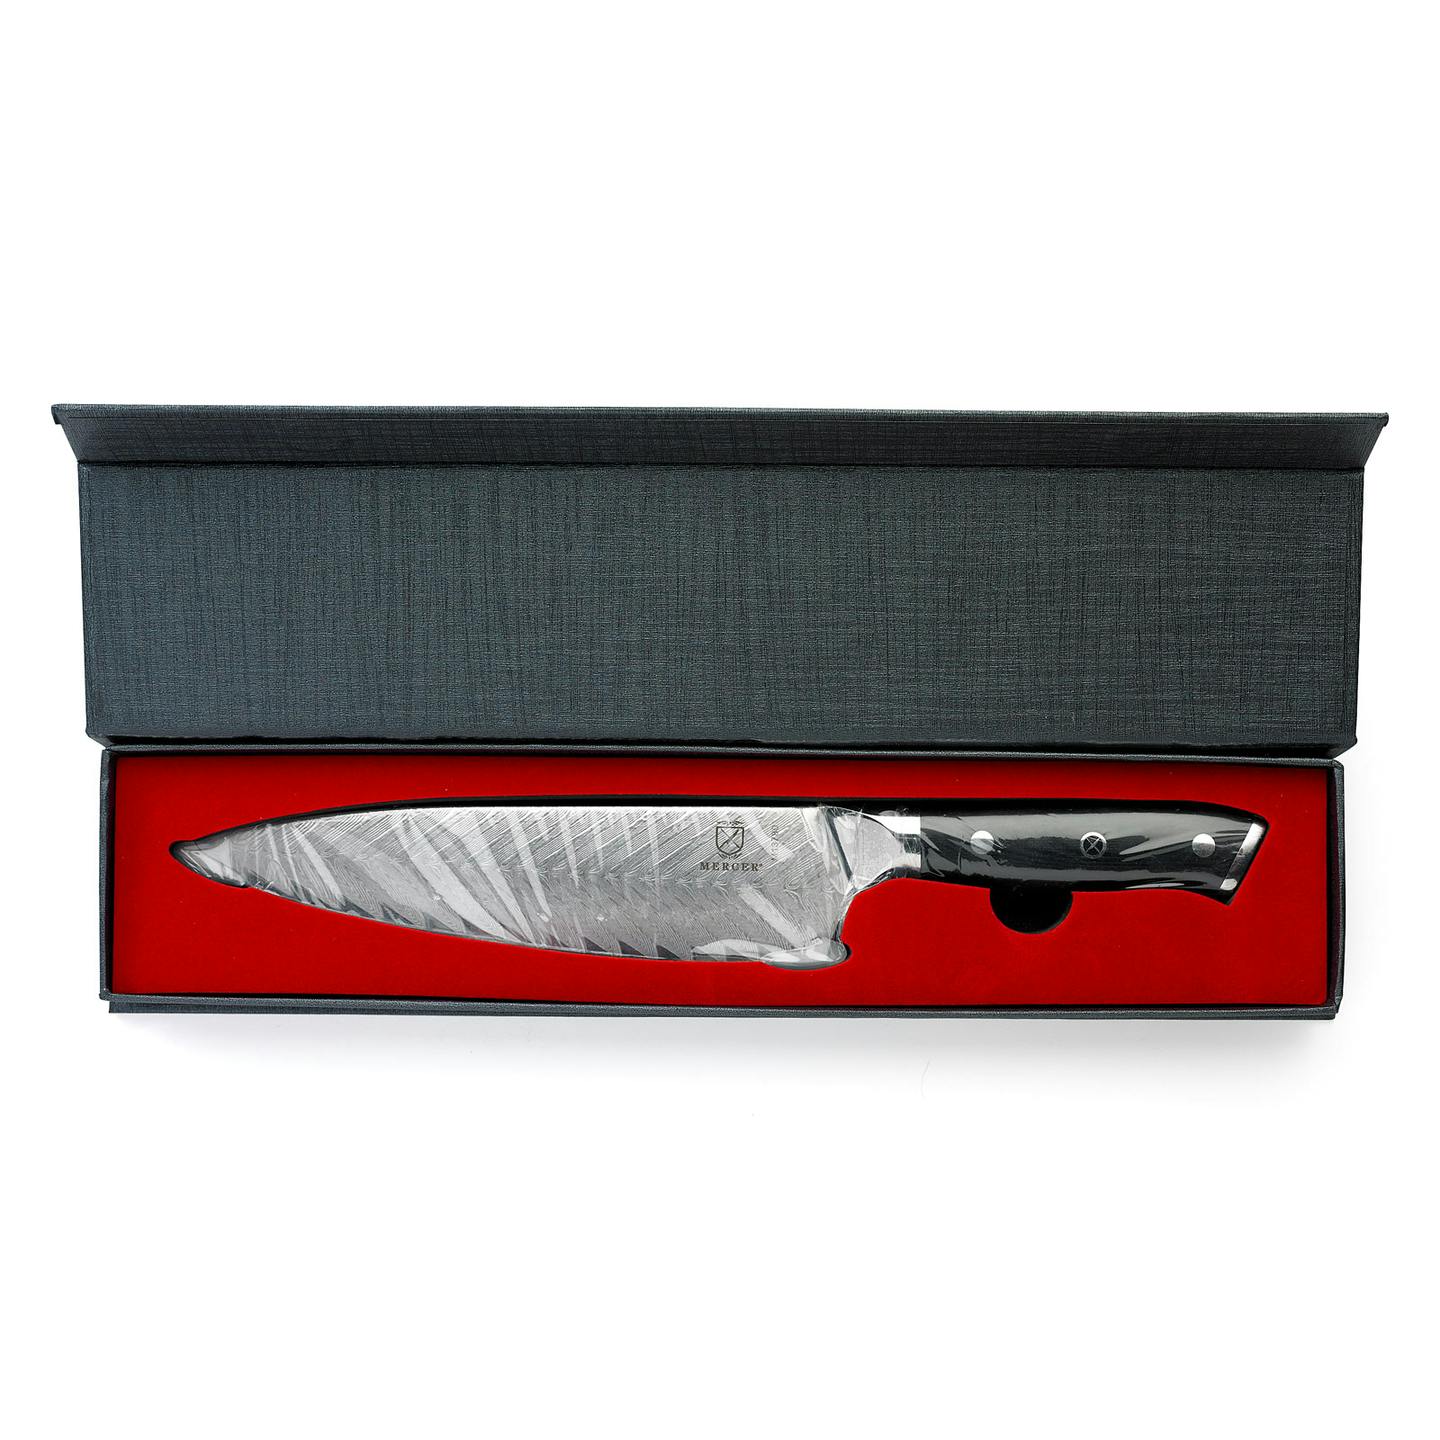 Mercer Culinary M13780 8" Damascus Chef's Knife with Leaf Etching